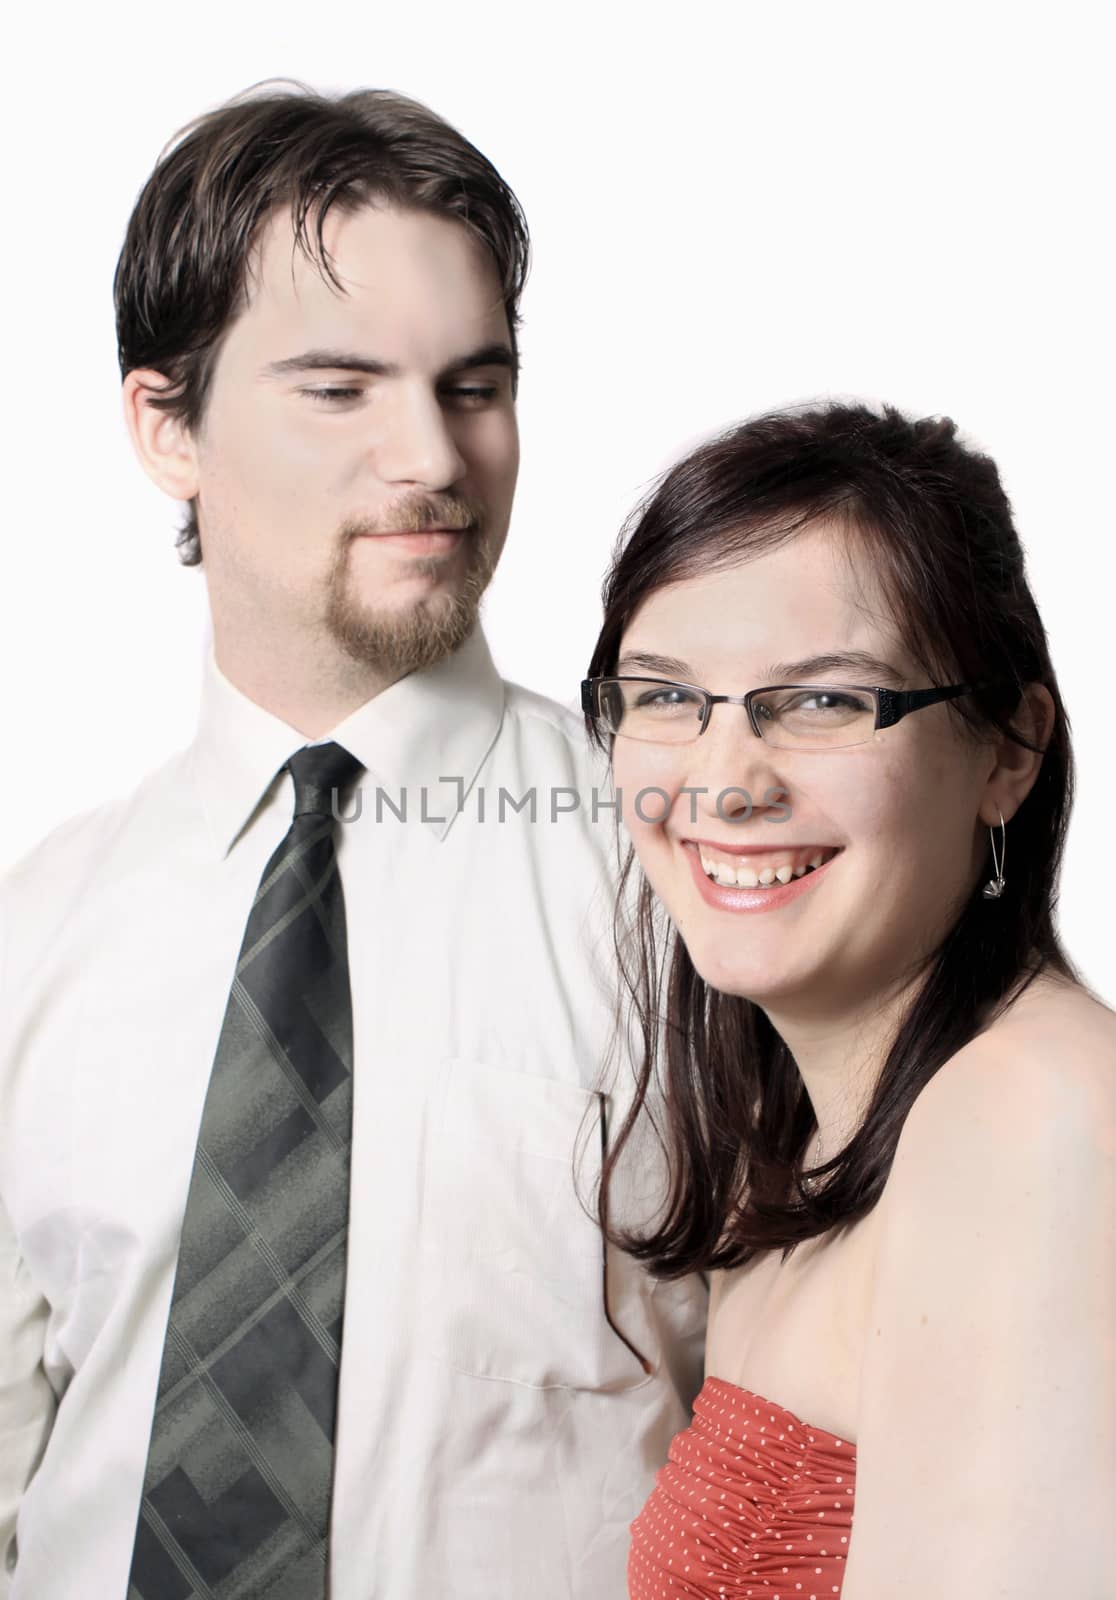 Cute young couple happy together on a white background